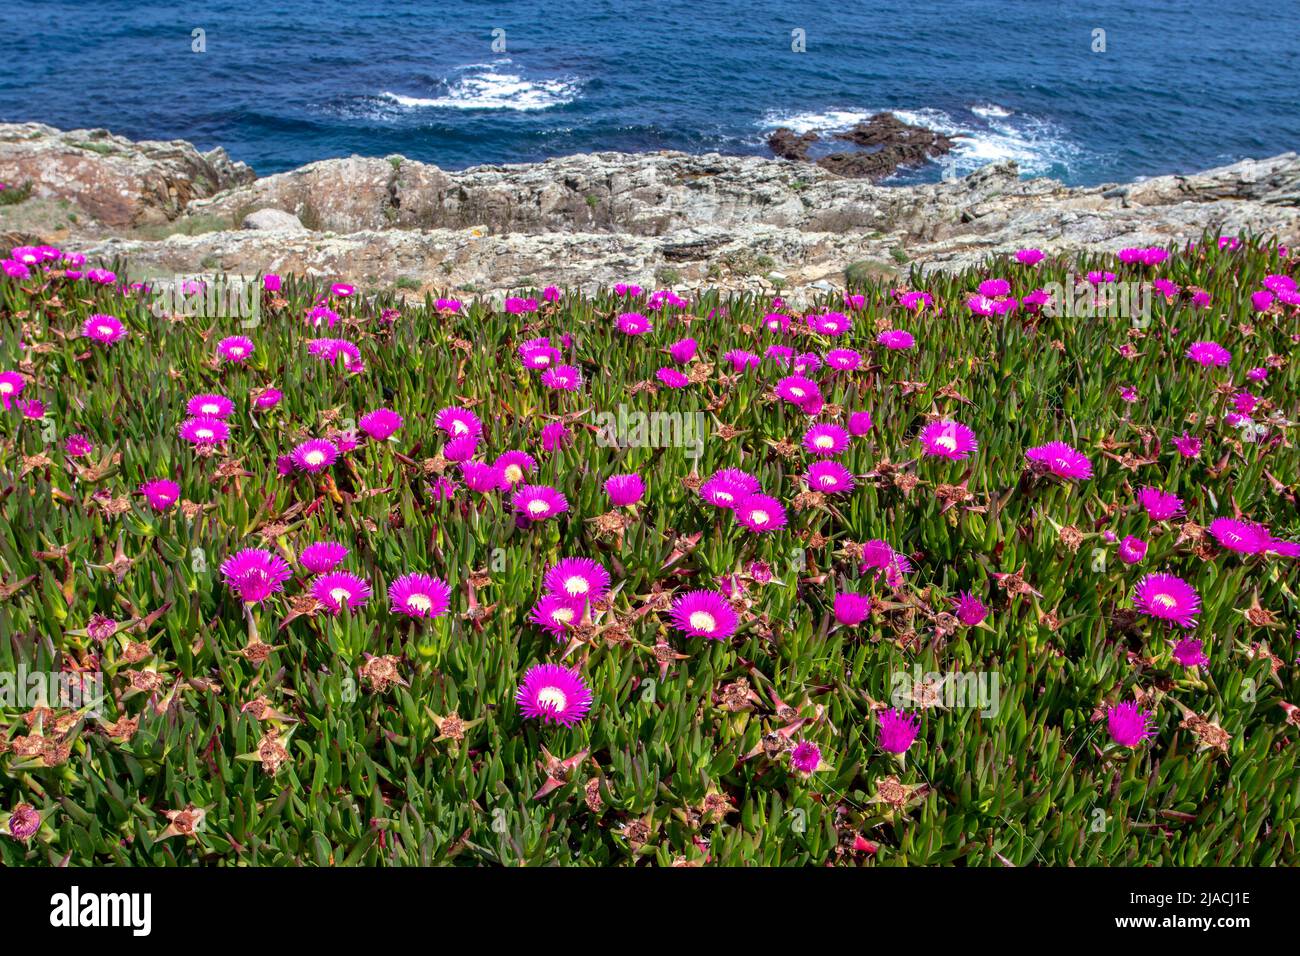 Ice plant or carpobrotus edulis or hottentot-fig or sour fig or highway ice plant with bright pink flowers at the sea shore in the spring Stock Photo